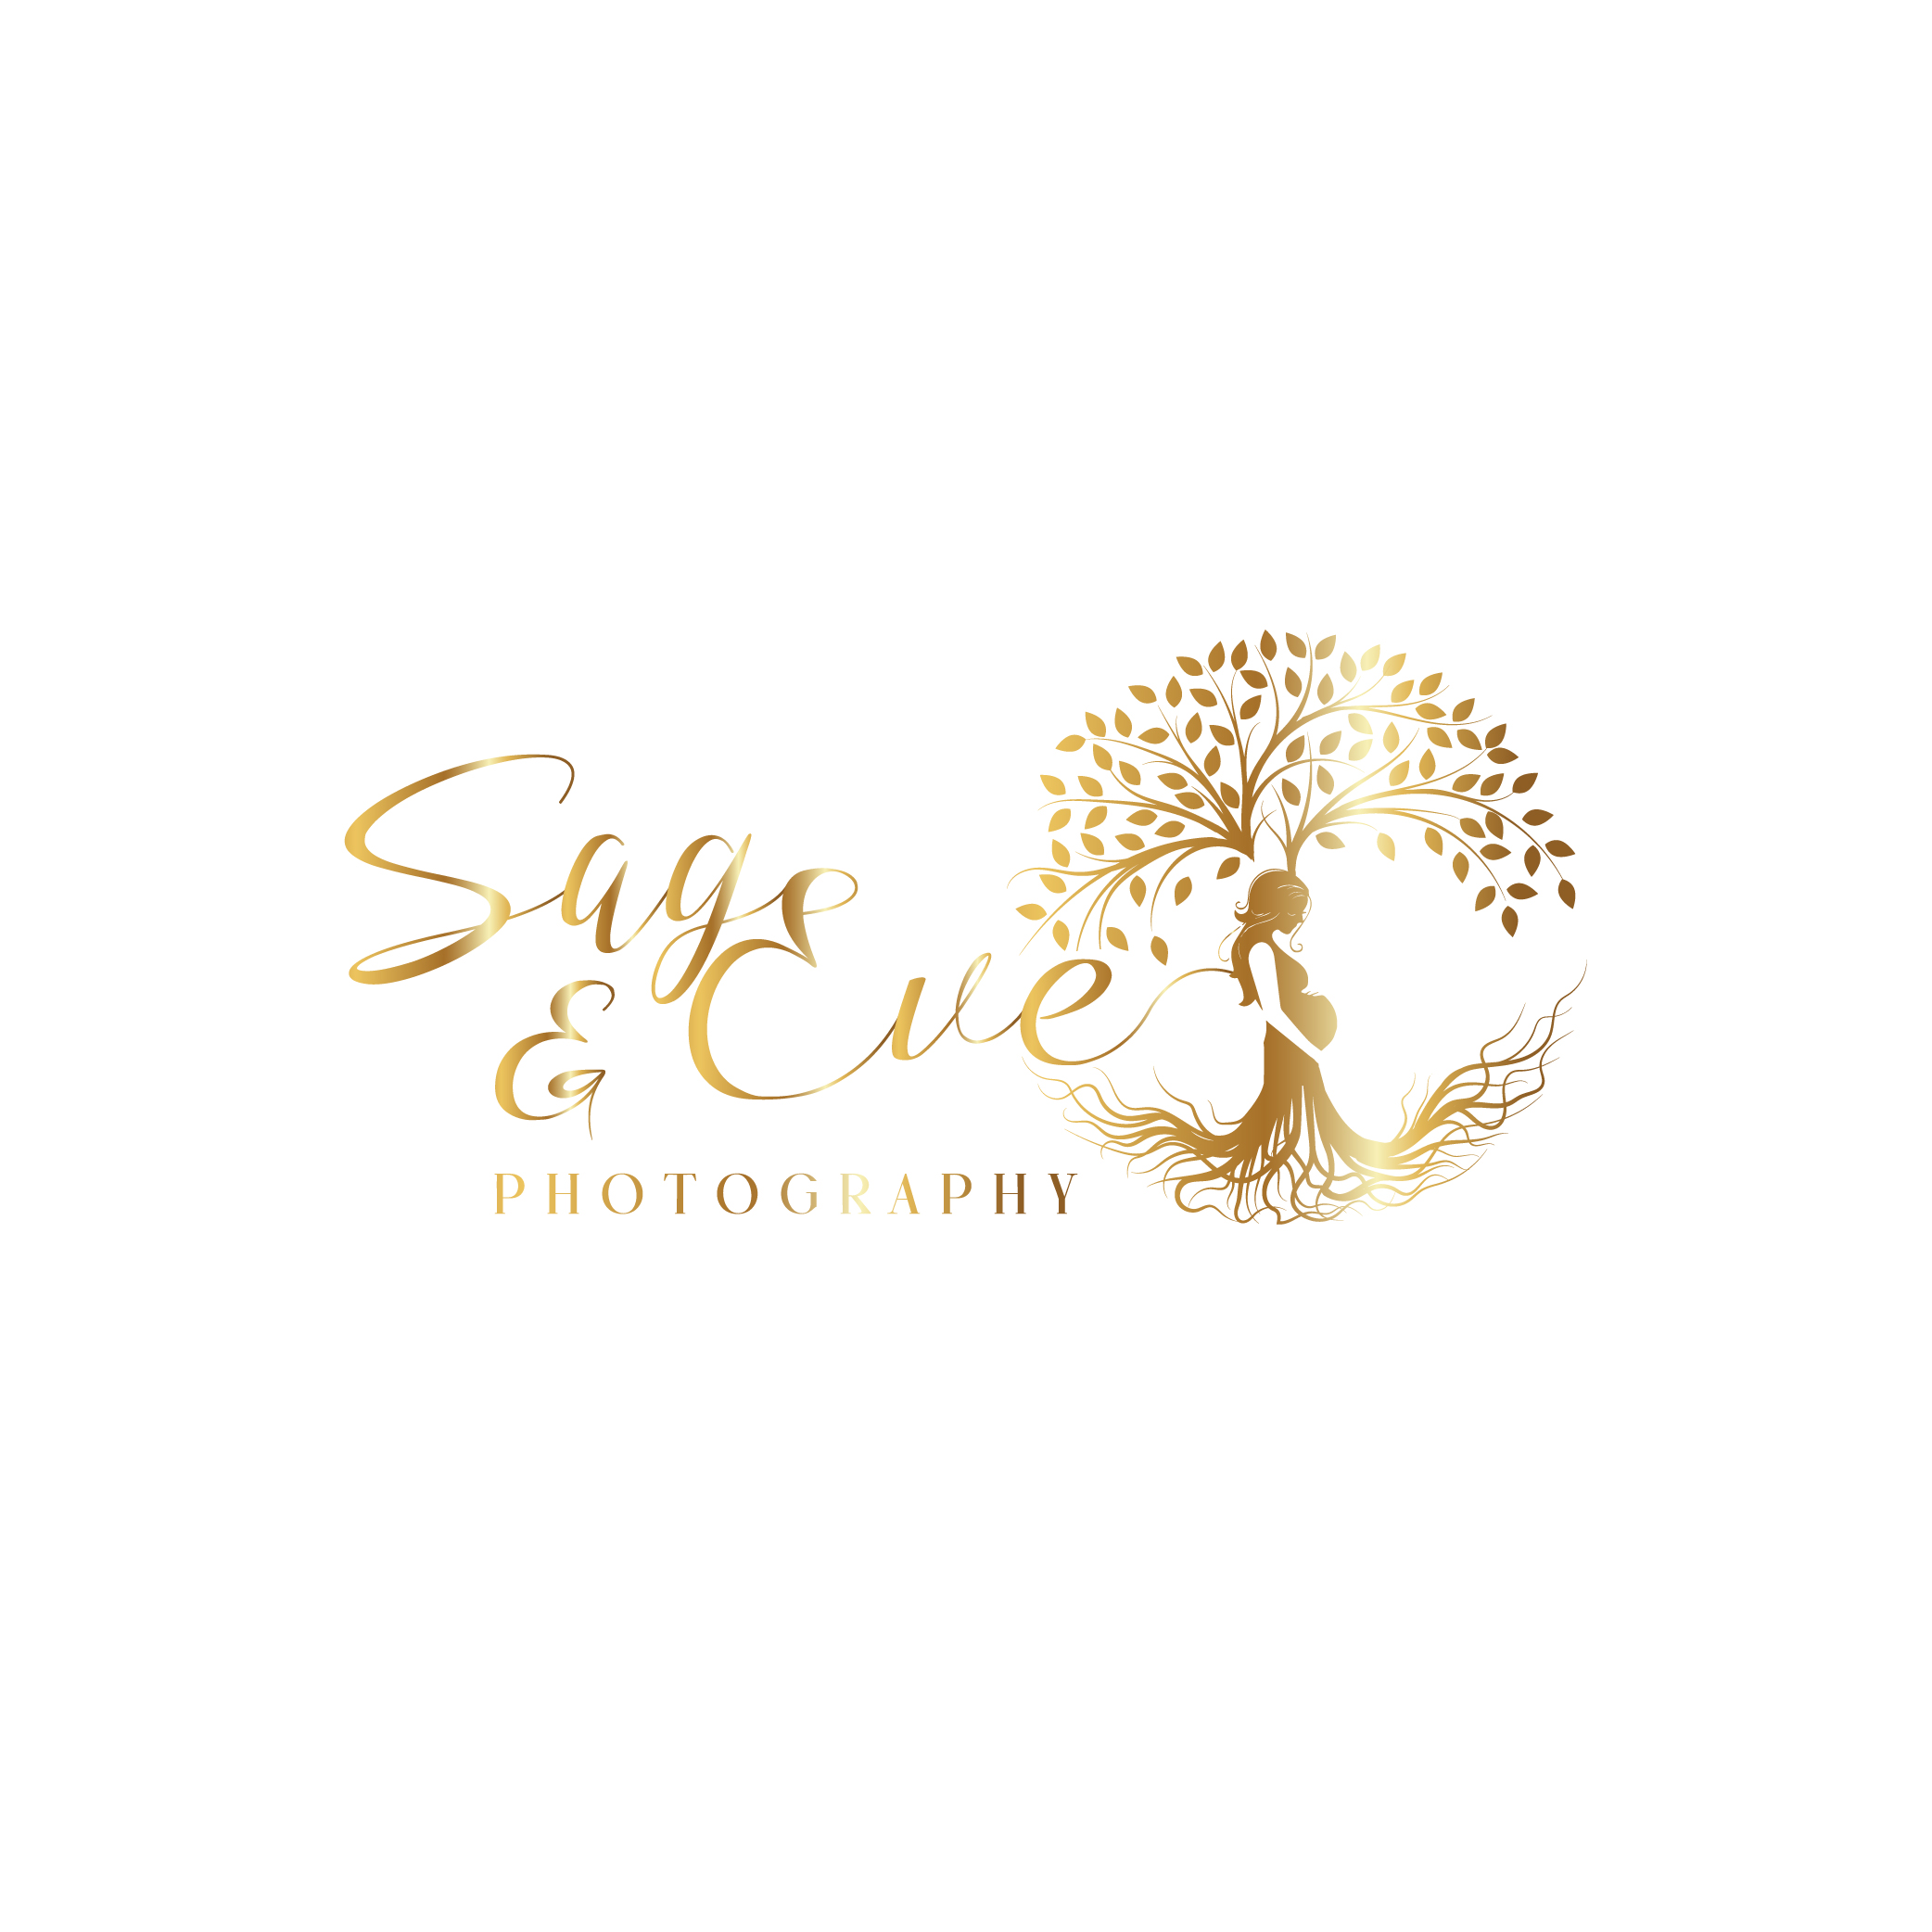 Sage and Eve Photography